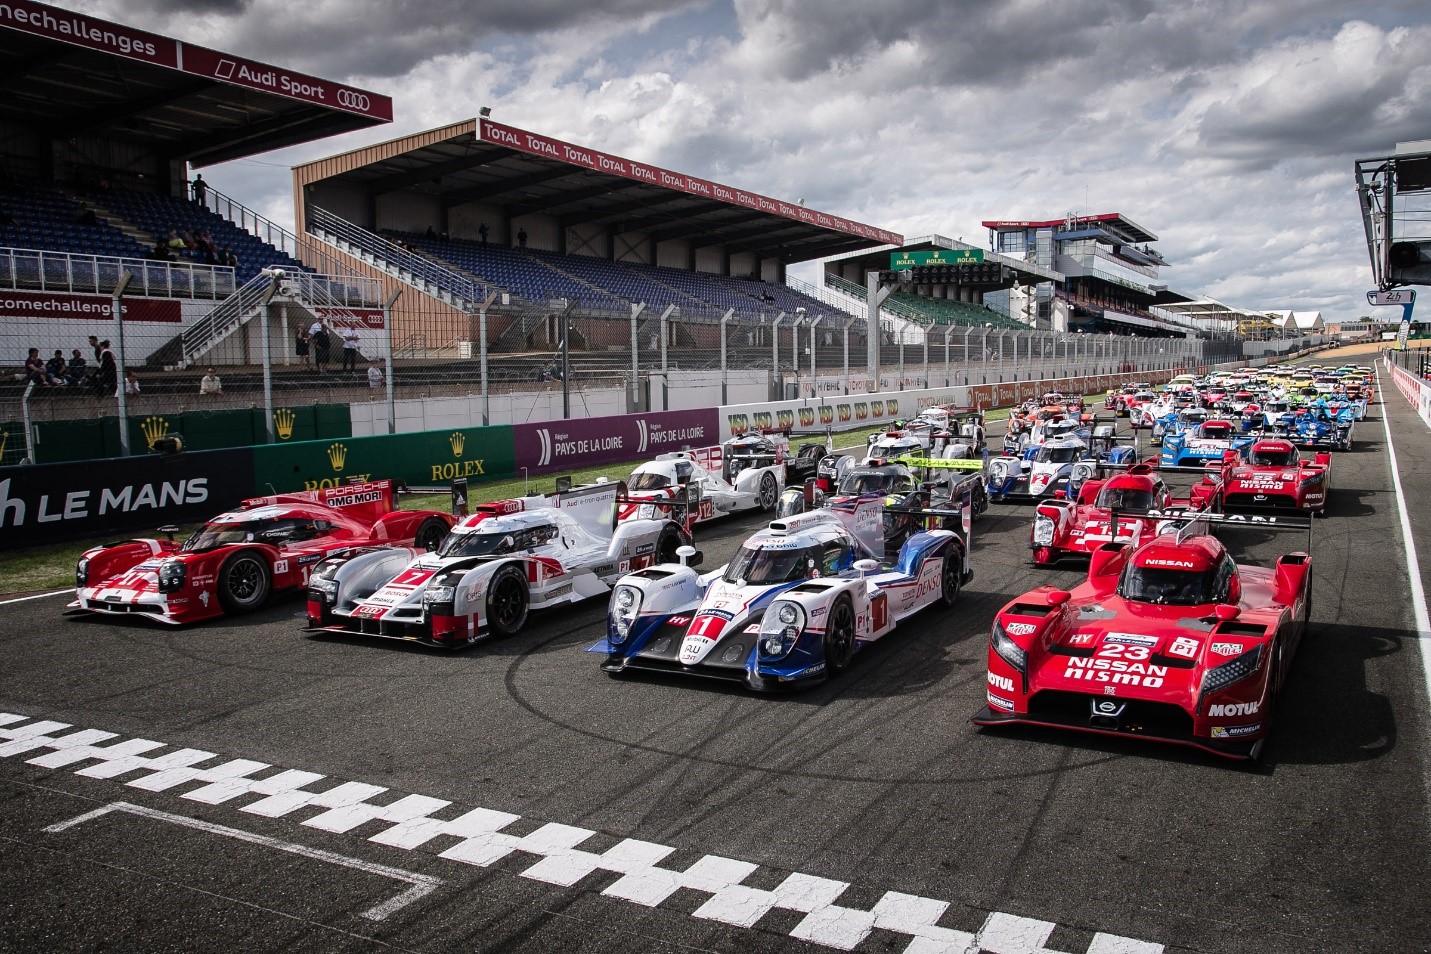 A lot of racing cars at Le Mans.